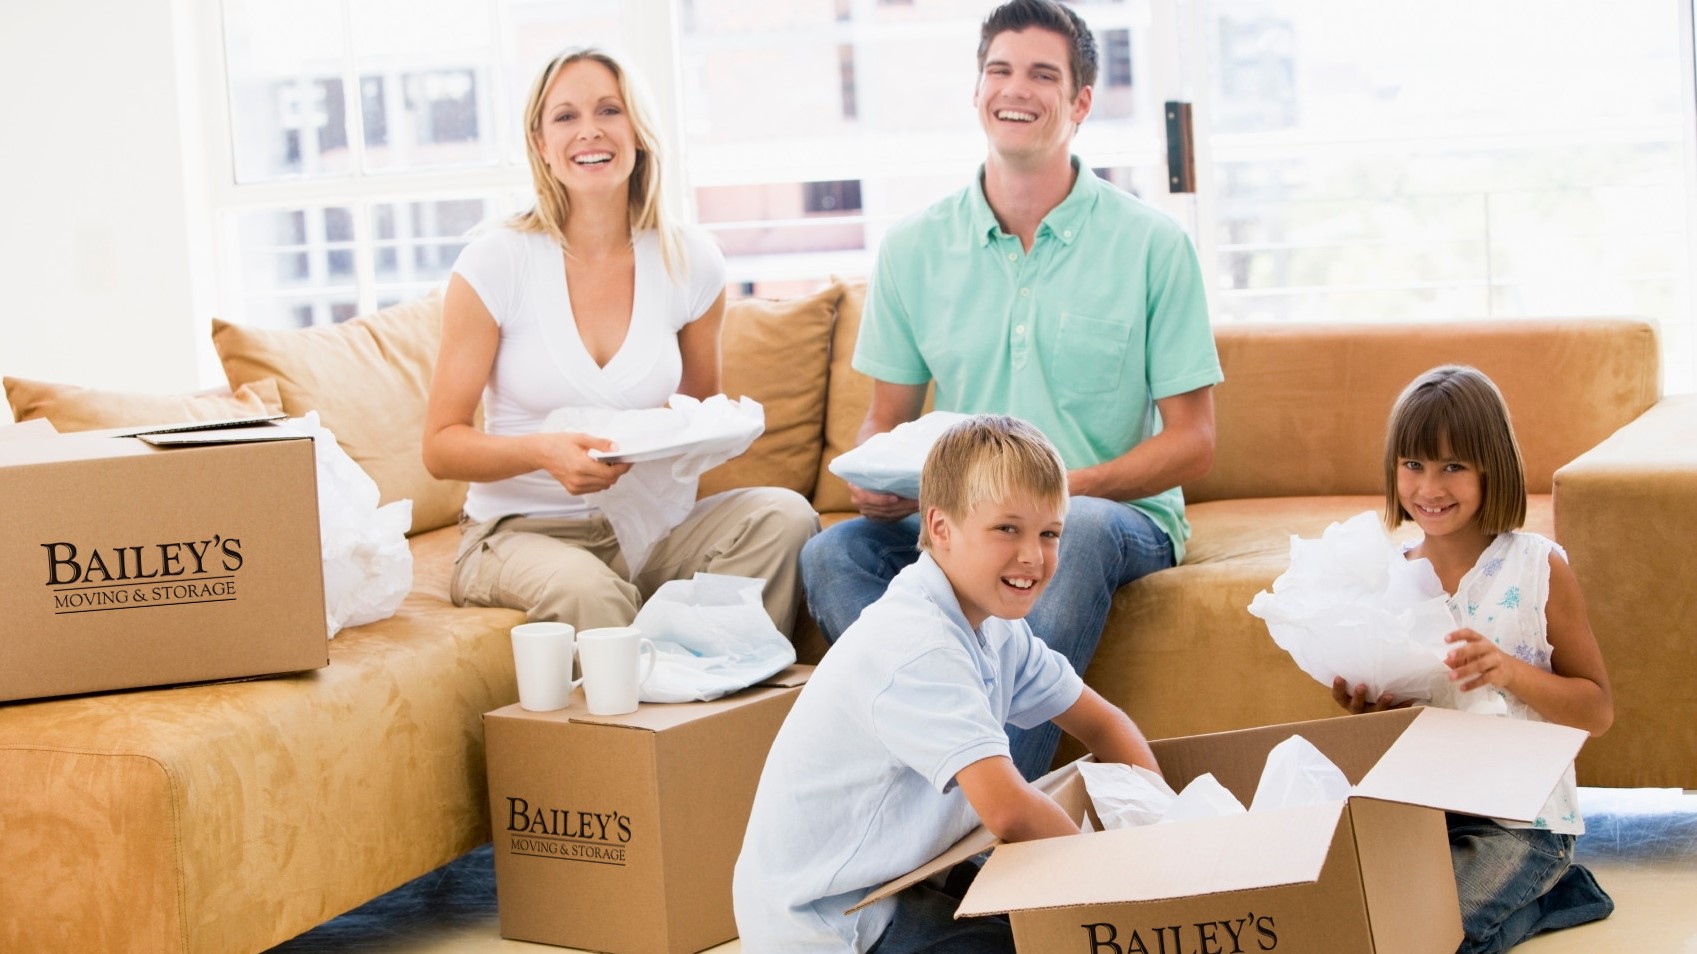 A family sits surrounded by moving boxes, smiling as they unpack. The moving boxes are branded Bailey's Moving & Storage boxes.